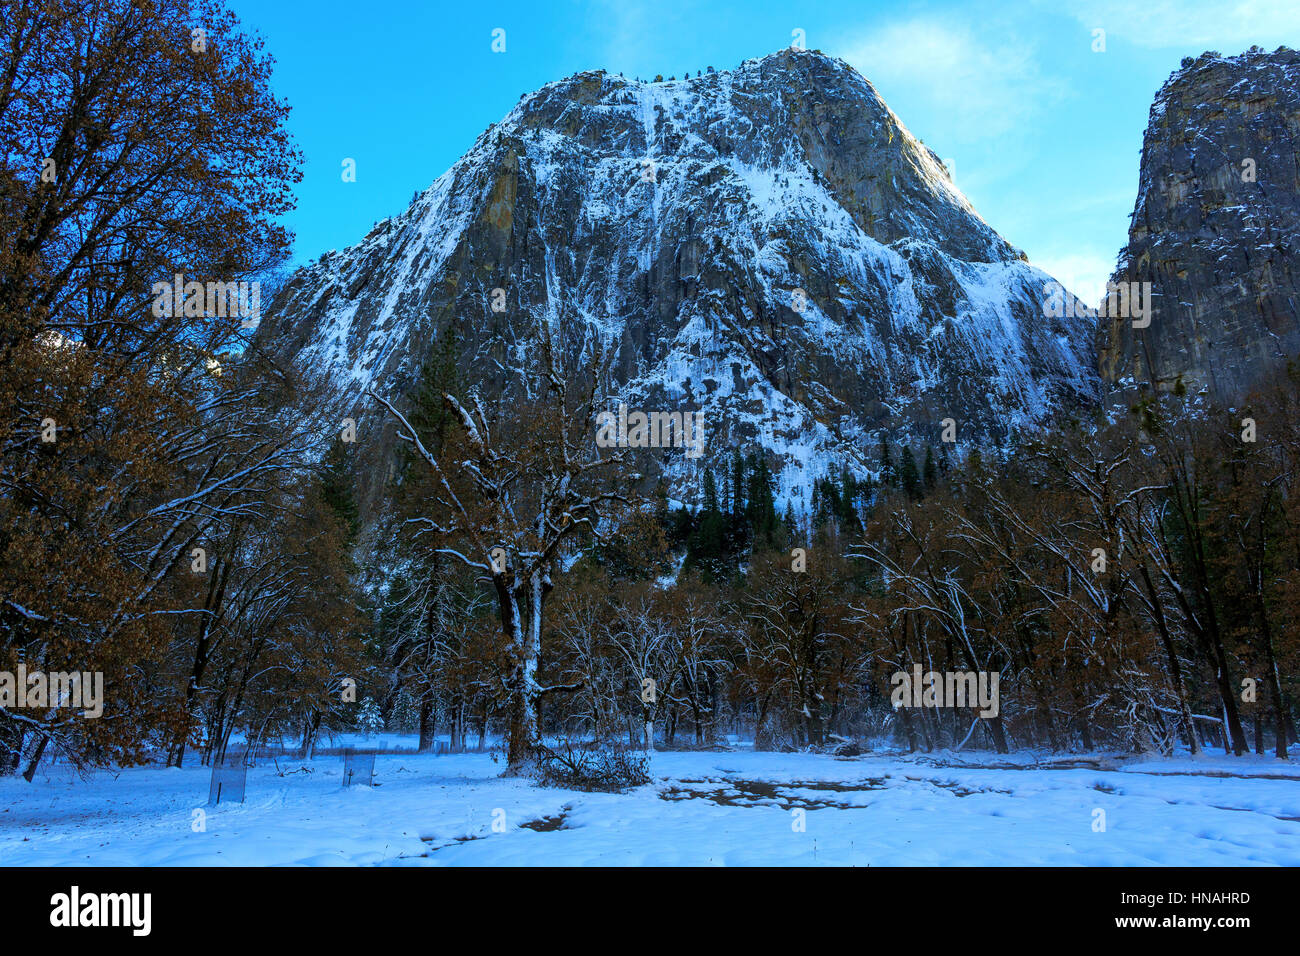 Snow, trees and frigid water fill the Yosemite Valley in Yosemite National Park, California, on 28 January 2017. Stock Photo